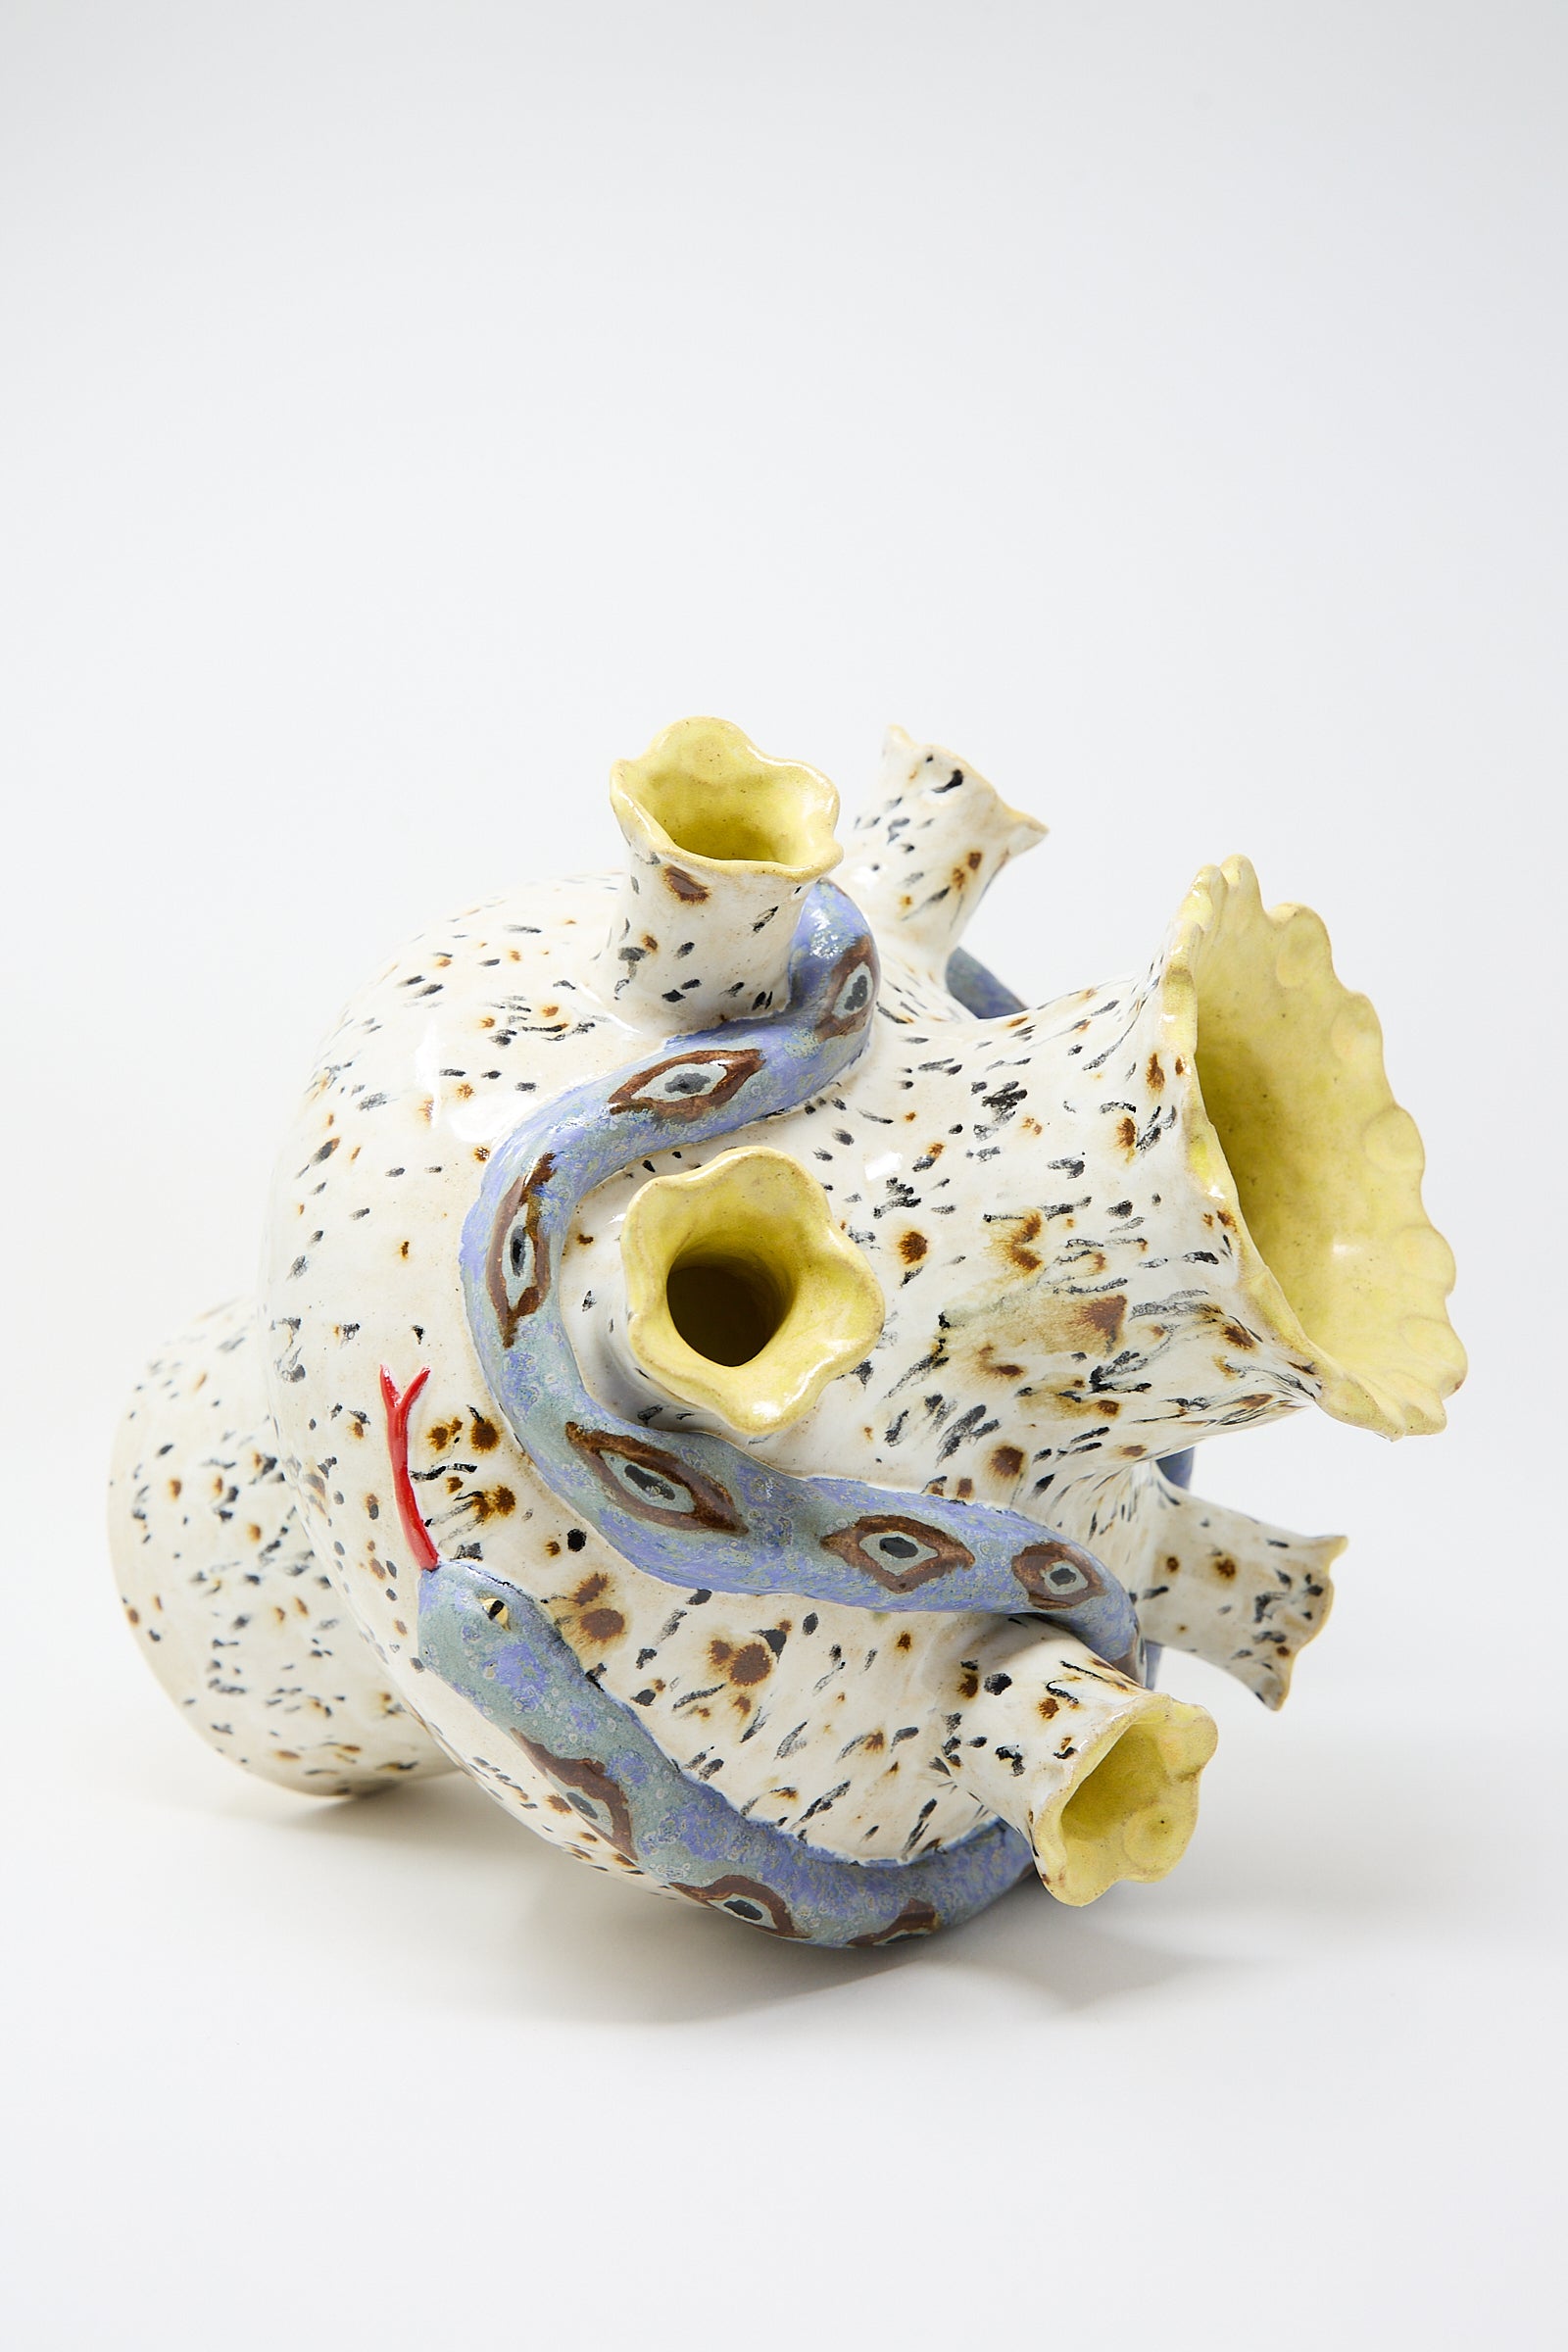 A ceramic sculpture of a whimsical, abstract creature with multiple openings and colorful patterns on a white background, crafted from glazed stoneware, by Pearce Williams.